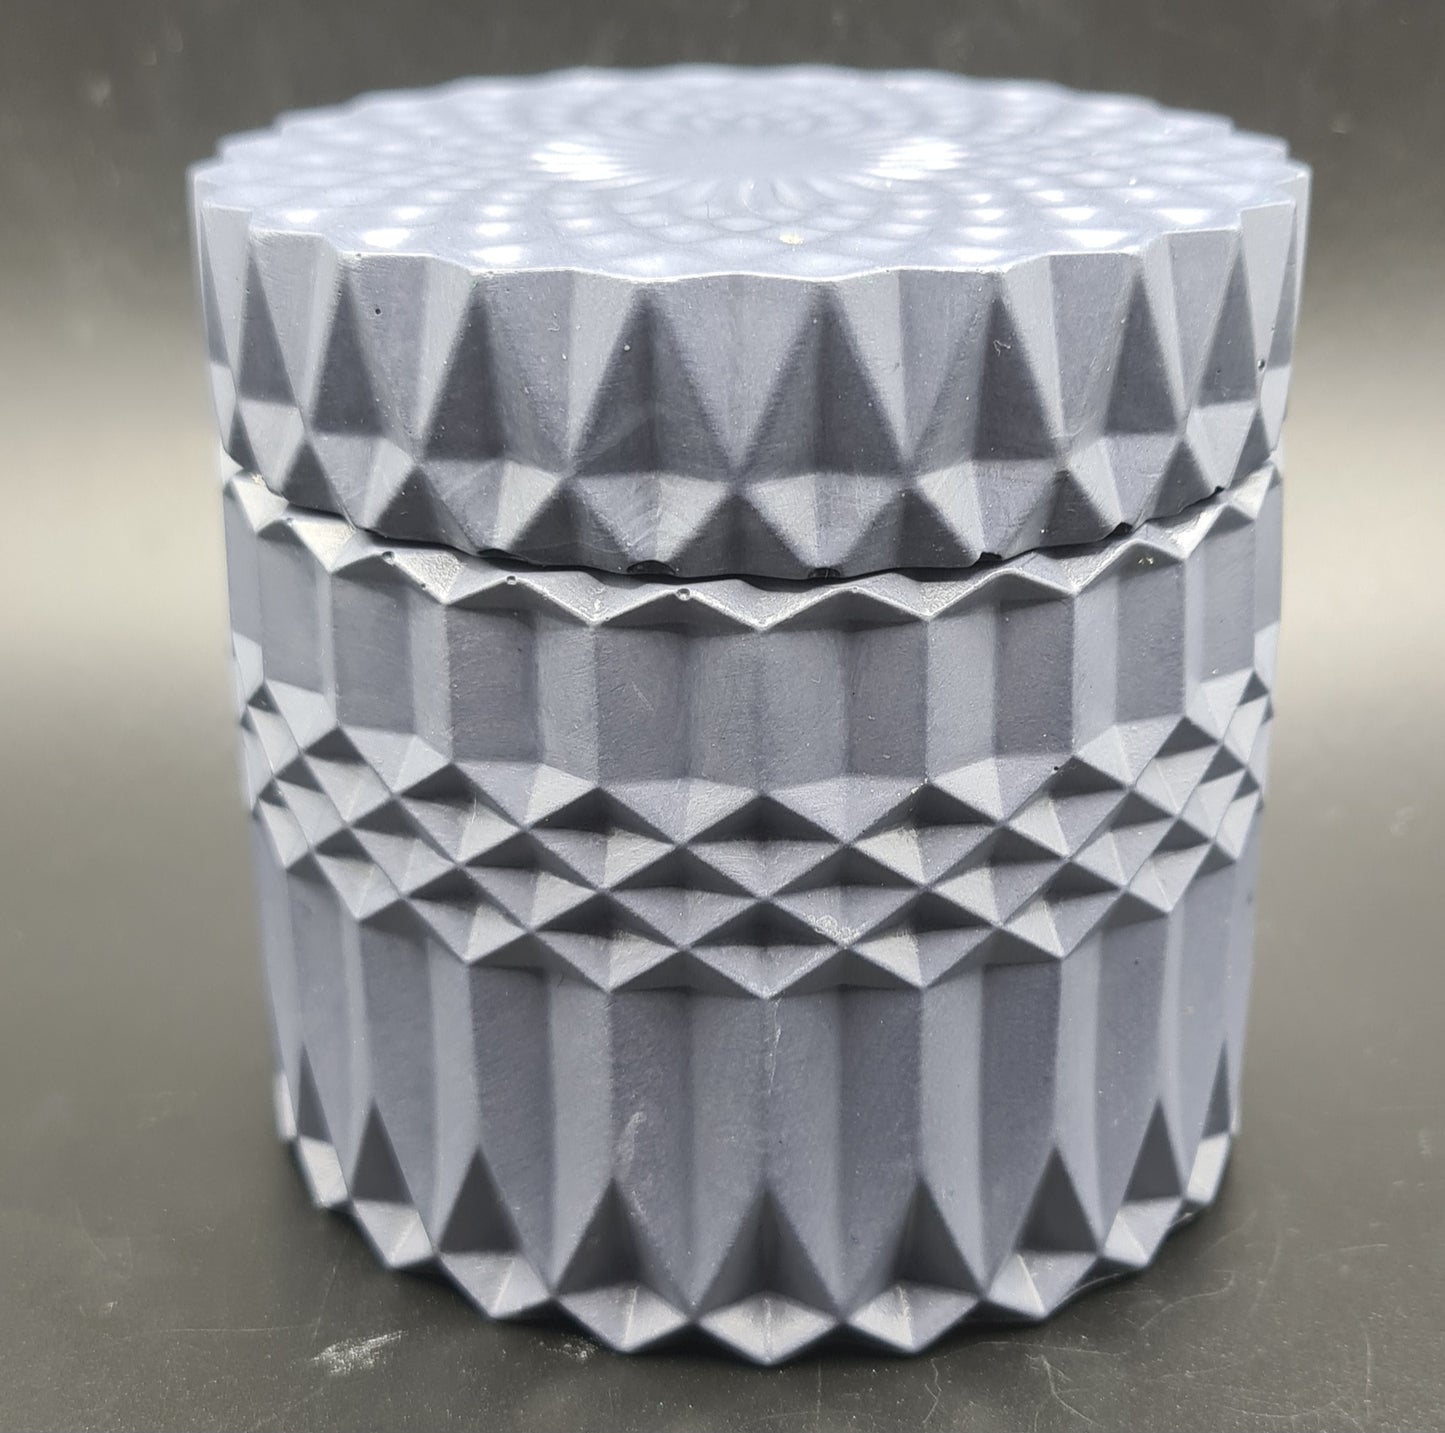 Elegant hand-poured candle in a stylish geometric pot design.